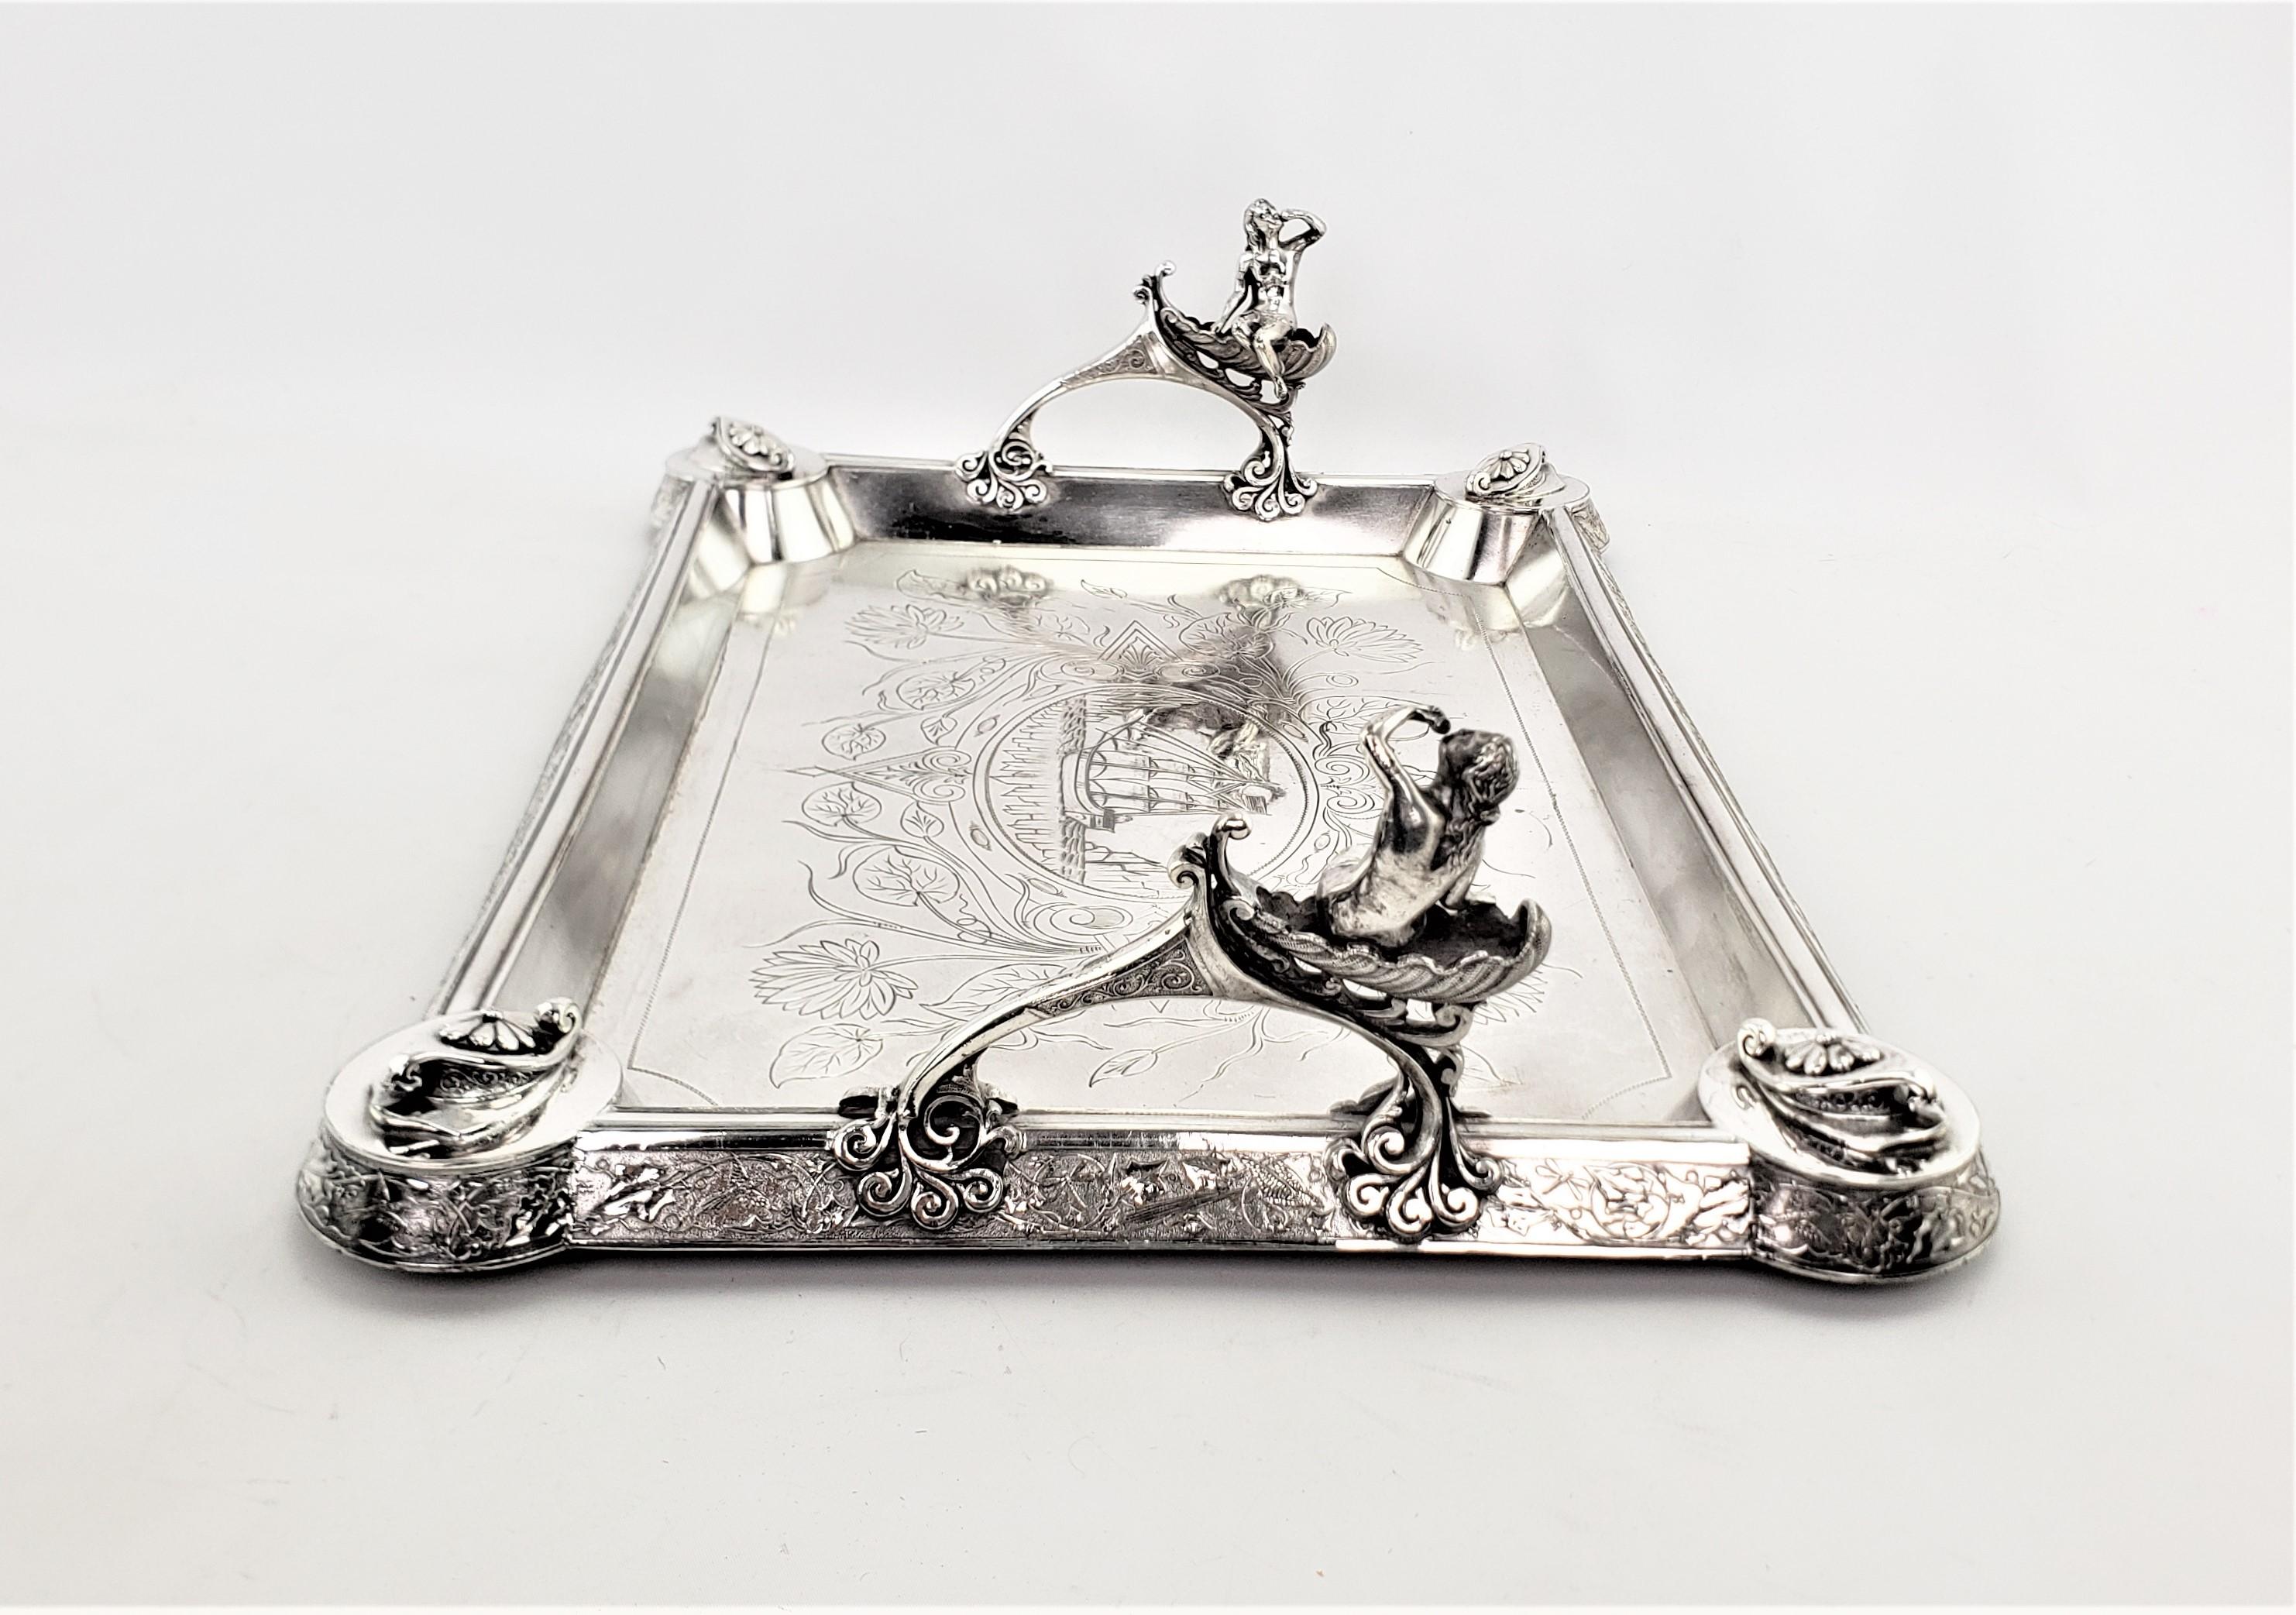 Machine-Made Antique Aesthetic Movement Silver Plated Serving Tray with Figural Siren Handles For Sale